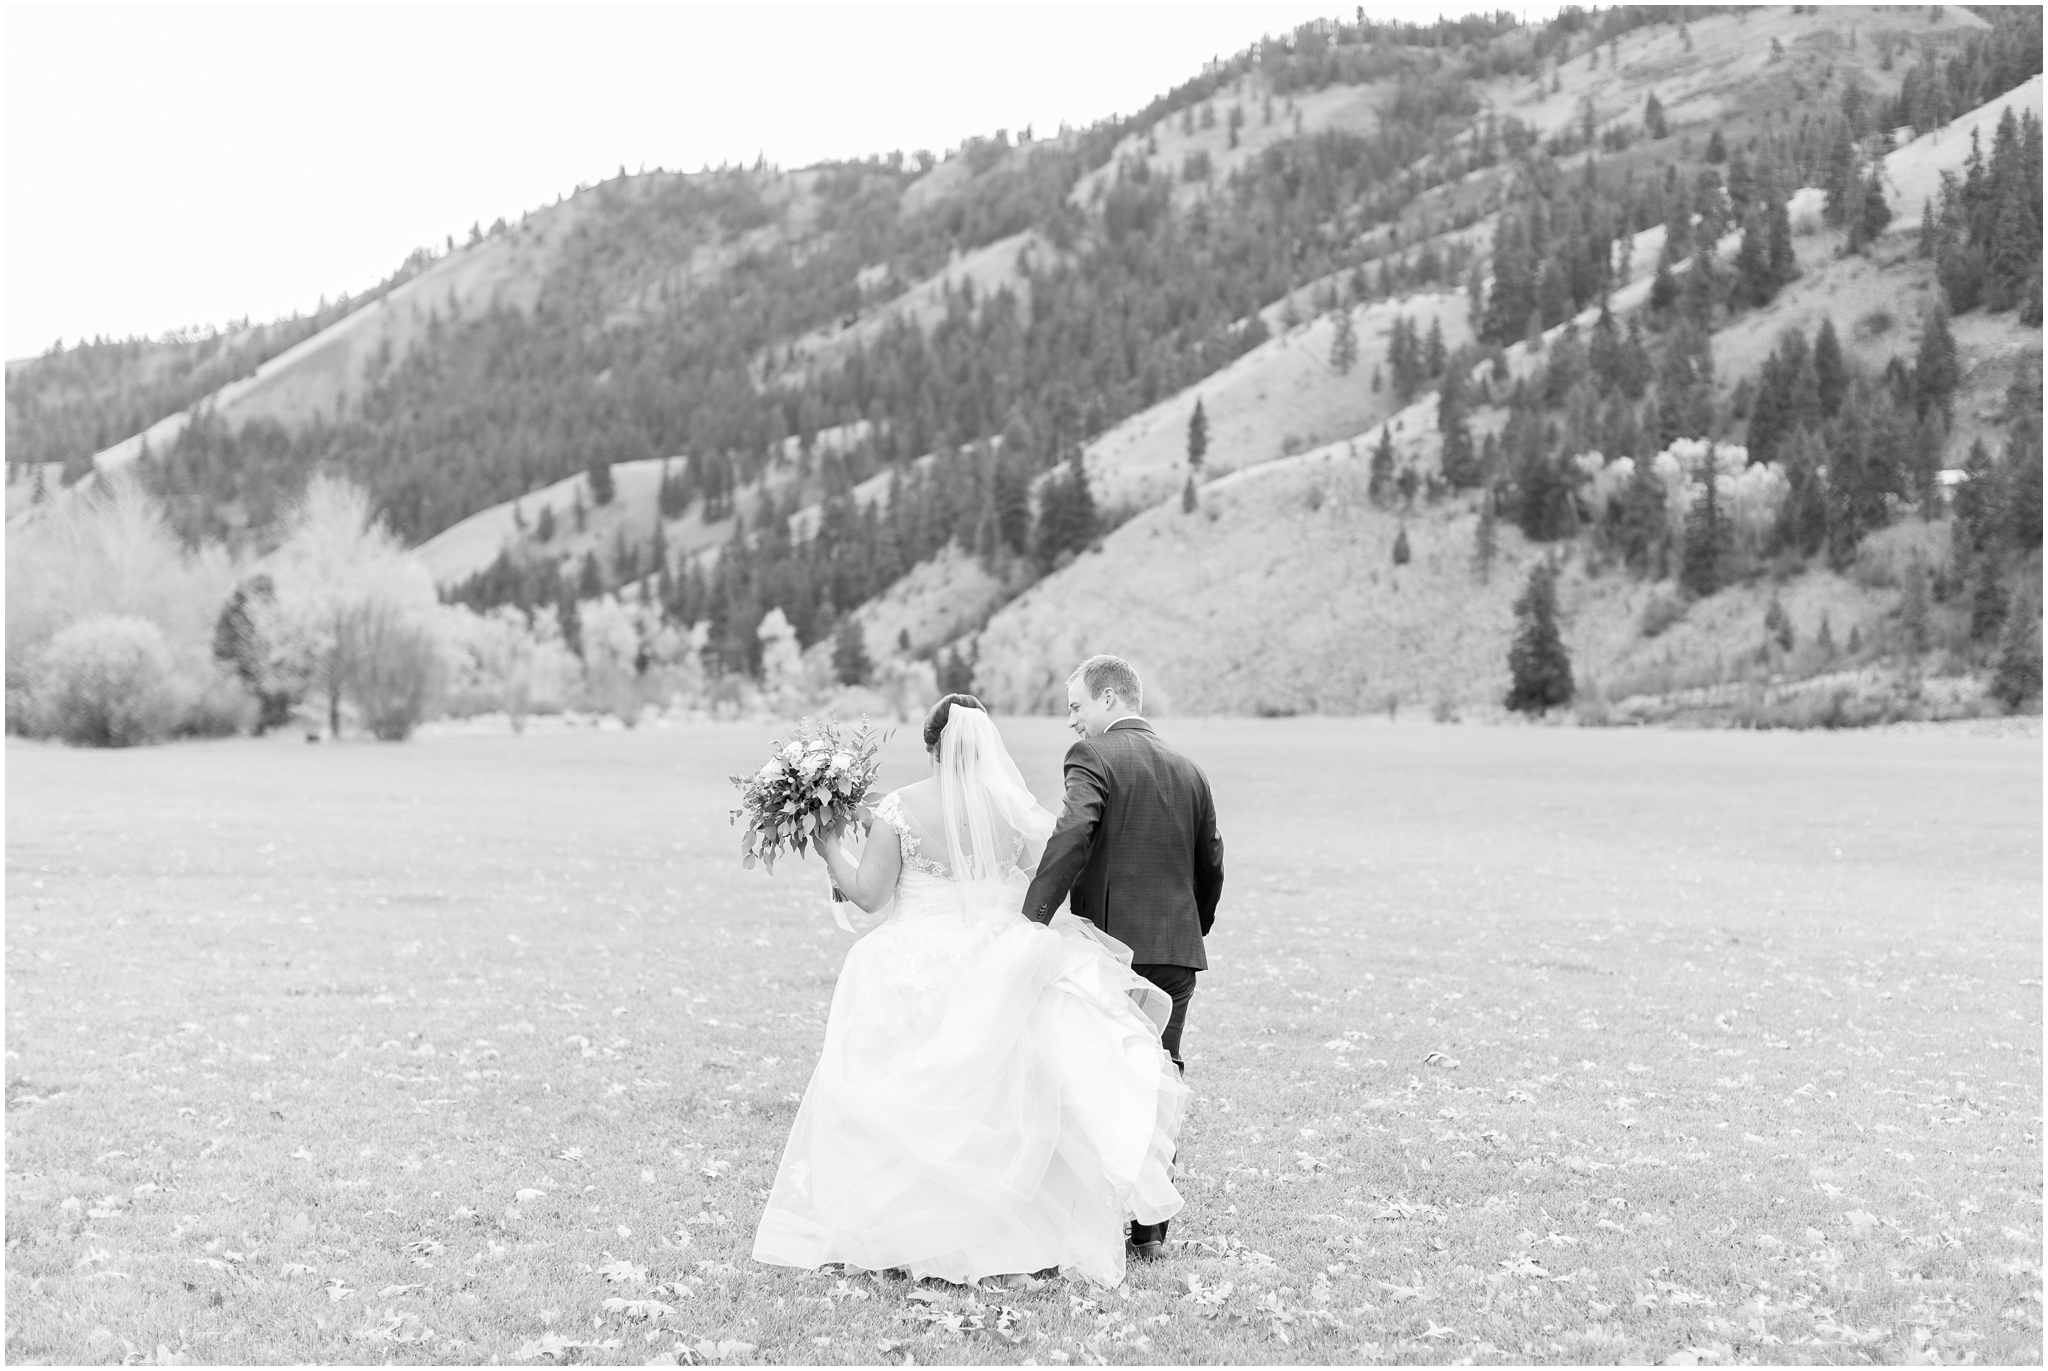 This American Homestead wedding was a Yakima wedding captured by Spokane wedding photographer Taylor Rose Photography at one of the best Yakima wedding venues, the American Homestead. Taylor Rose Photography is a Northern Virginia Wedding photographer and DC wedding photographer capturing weddings, engagement sessions and anniversaries across the U.S. and beyond. Mountain wedding venues Washington